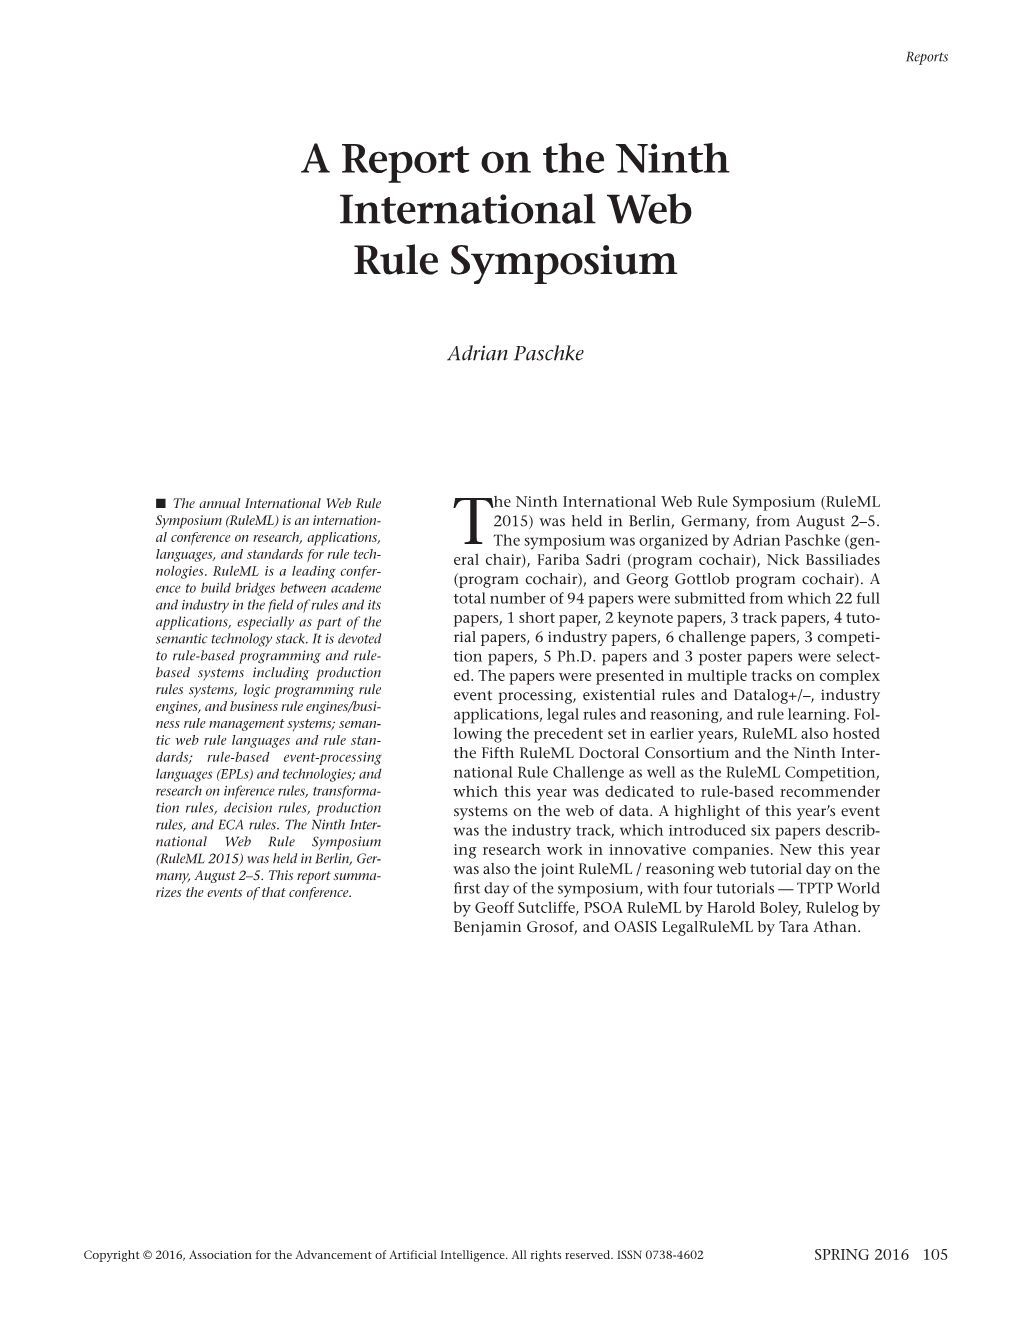 A Report on the Ninth International Web Rule Symposium